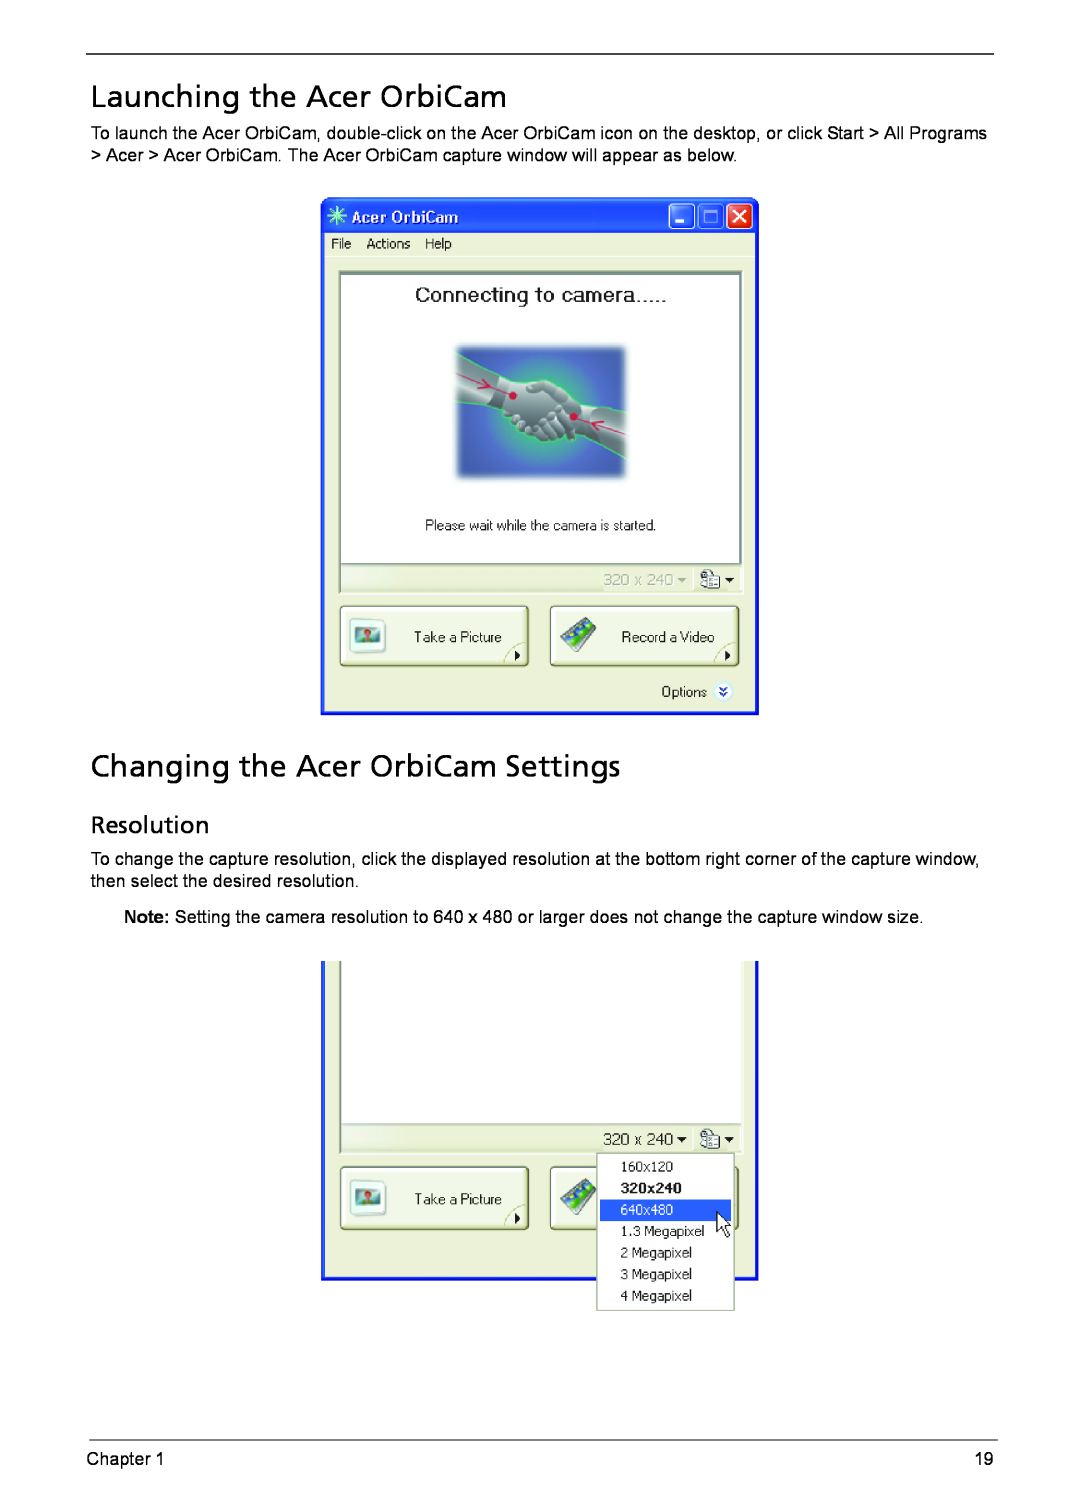 Acer 6460, 6410 manual Launching the Acer OrbiCam, Changing the Acer OrbiCam Settings, Resolution 